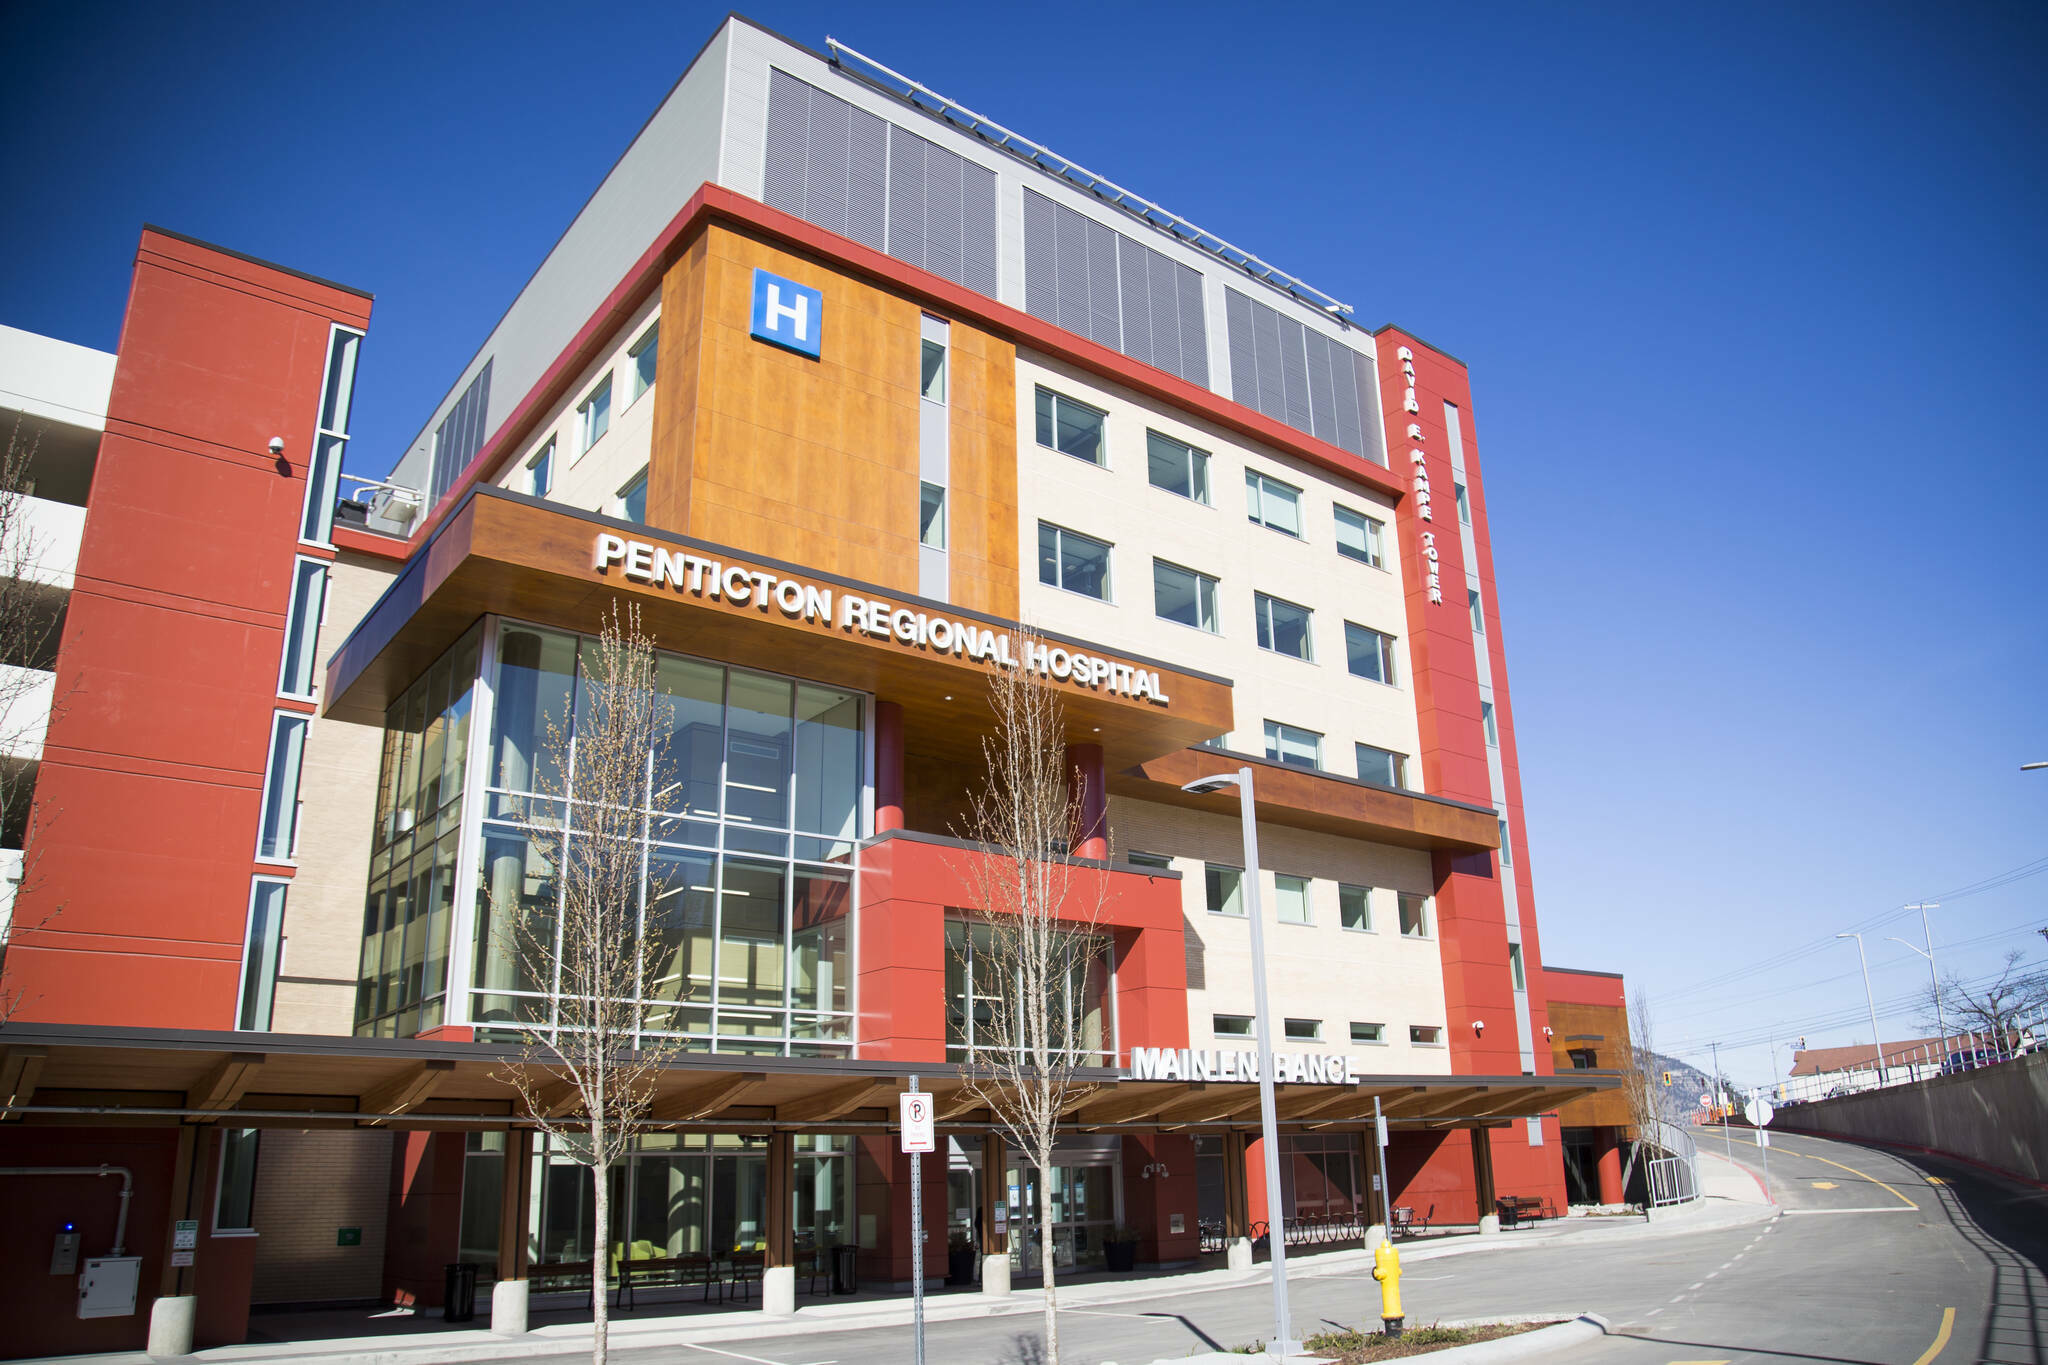 An incident of suspected drug use is being investigated at Penticton’s Regional Hospital. (File photo)